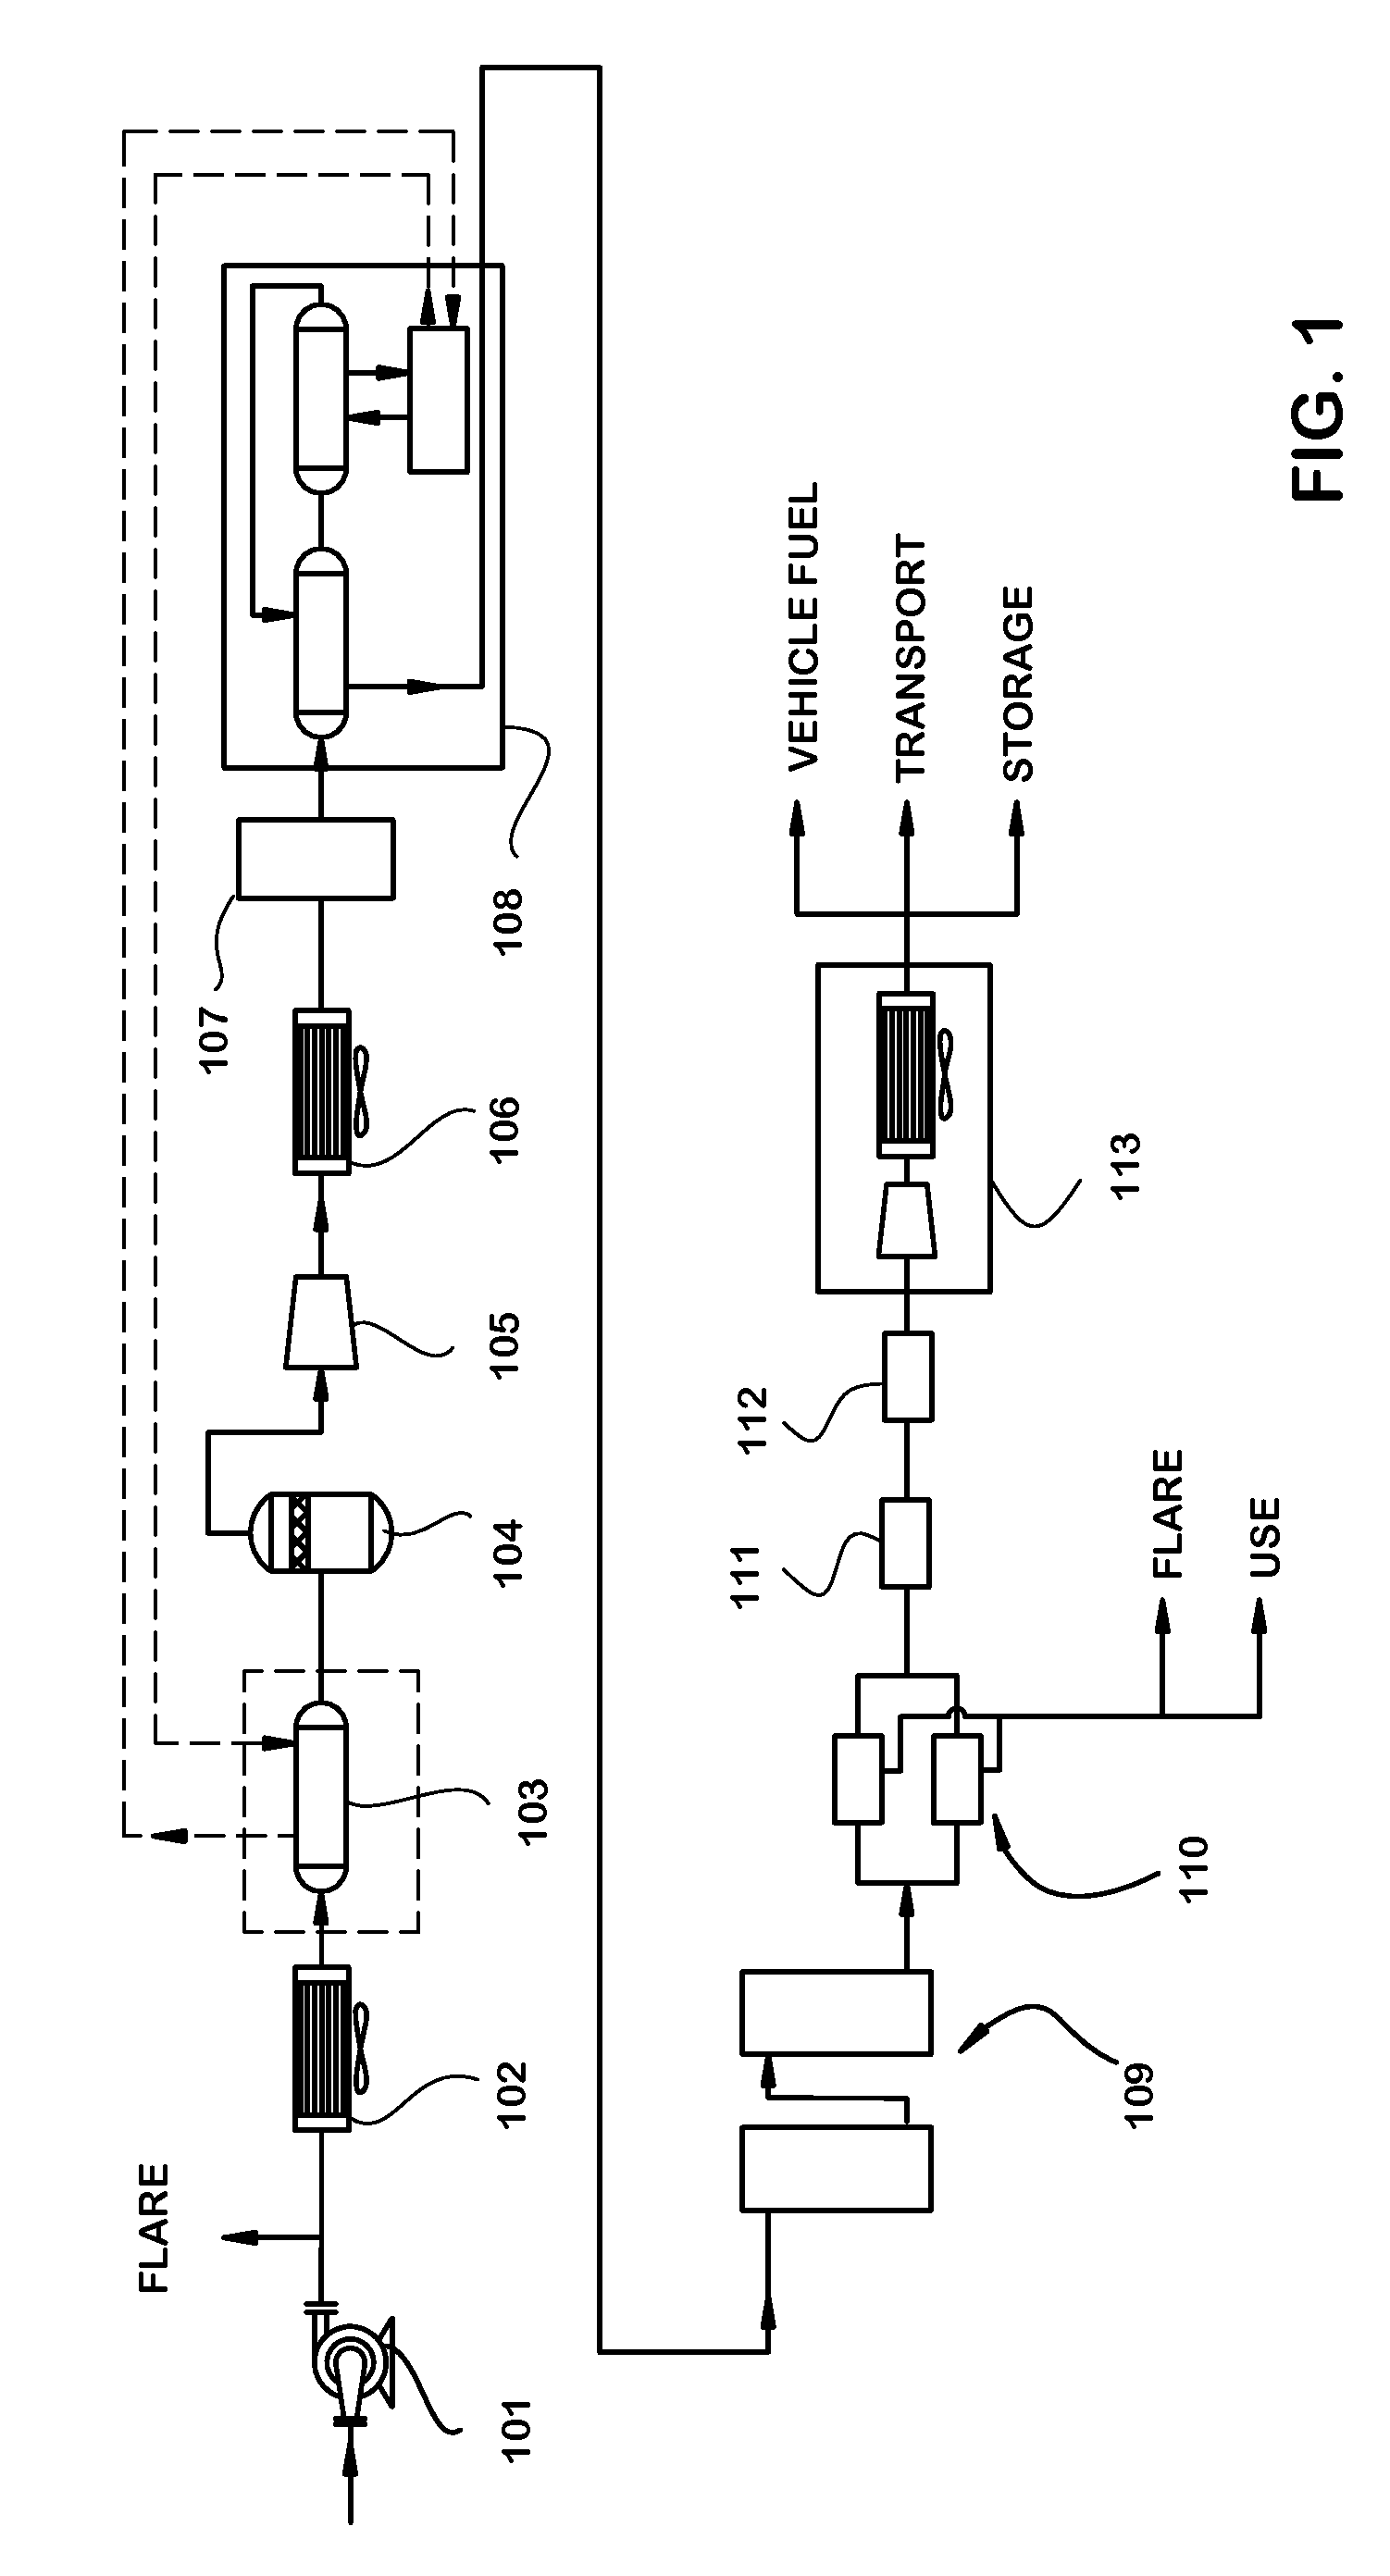 Method for production of a compressed natural gas equivalent from landfill gas and other biogases